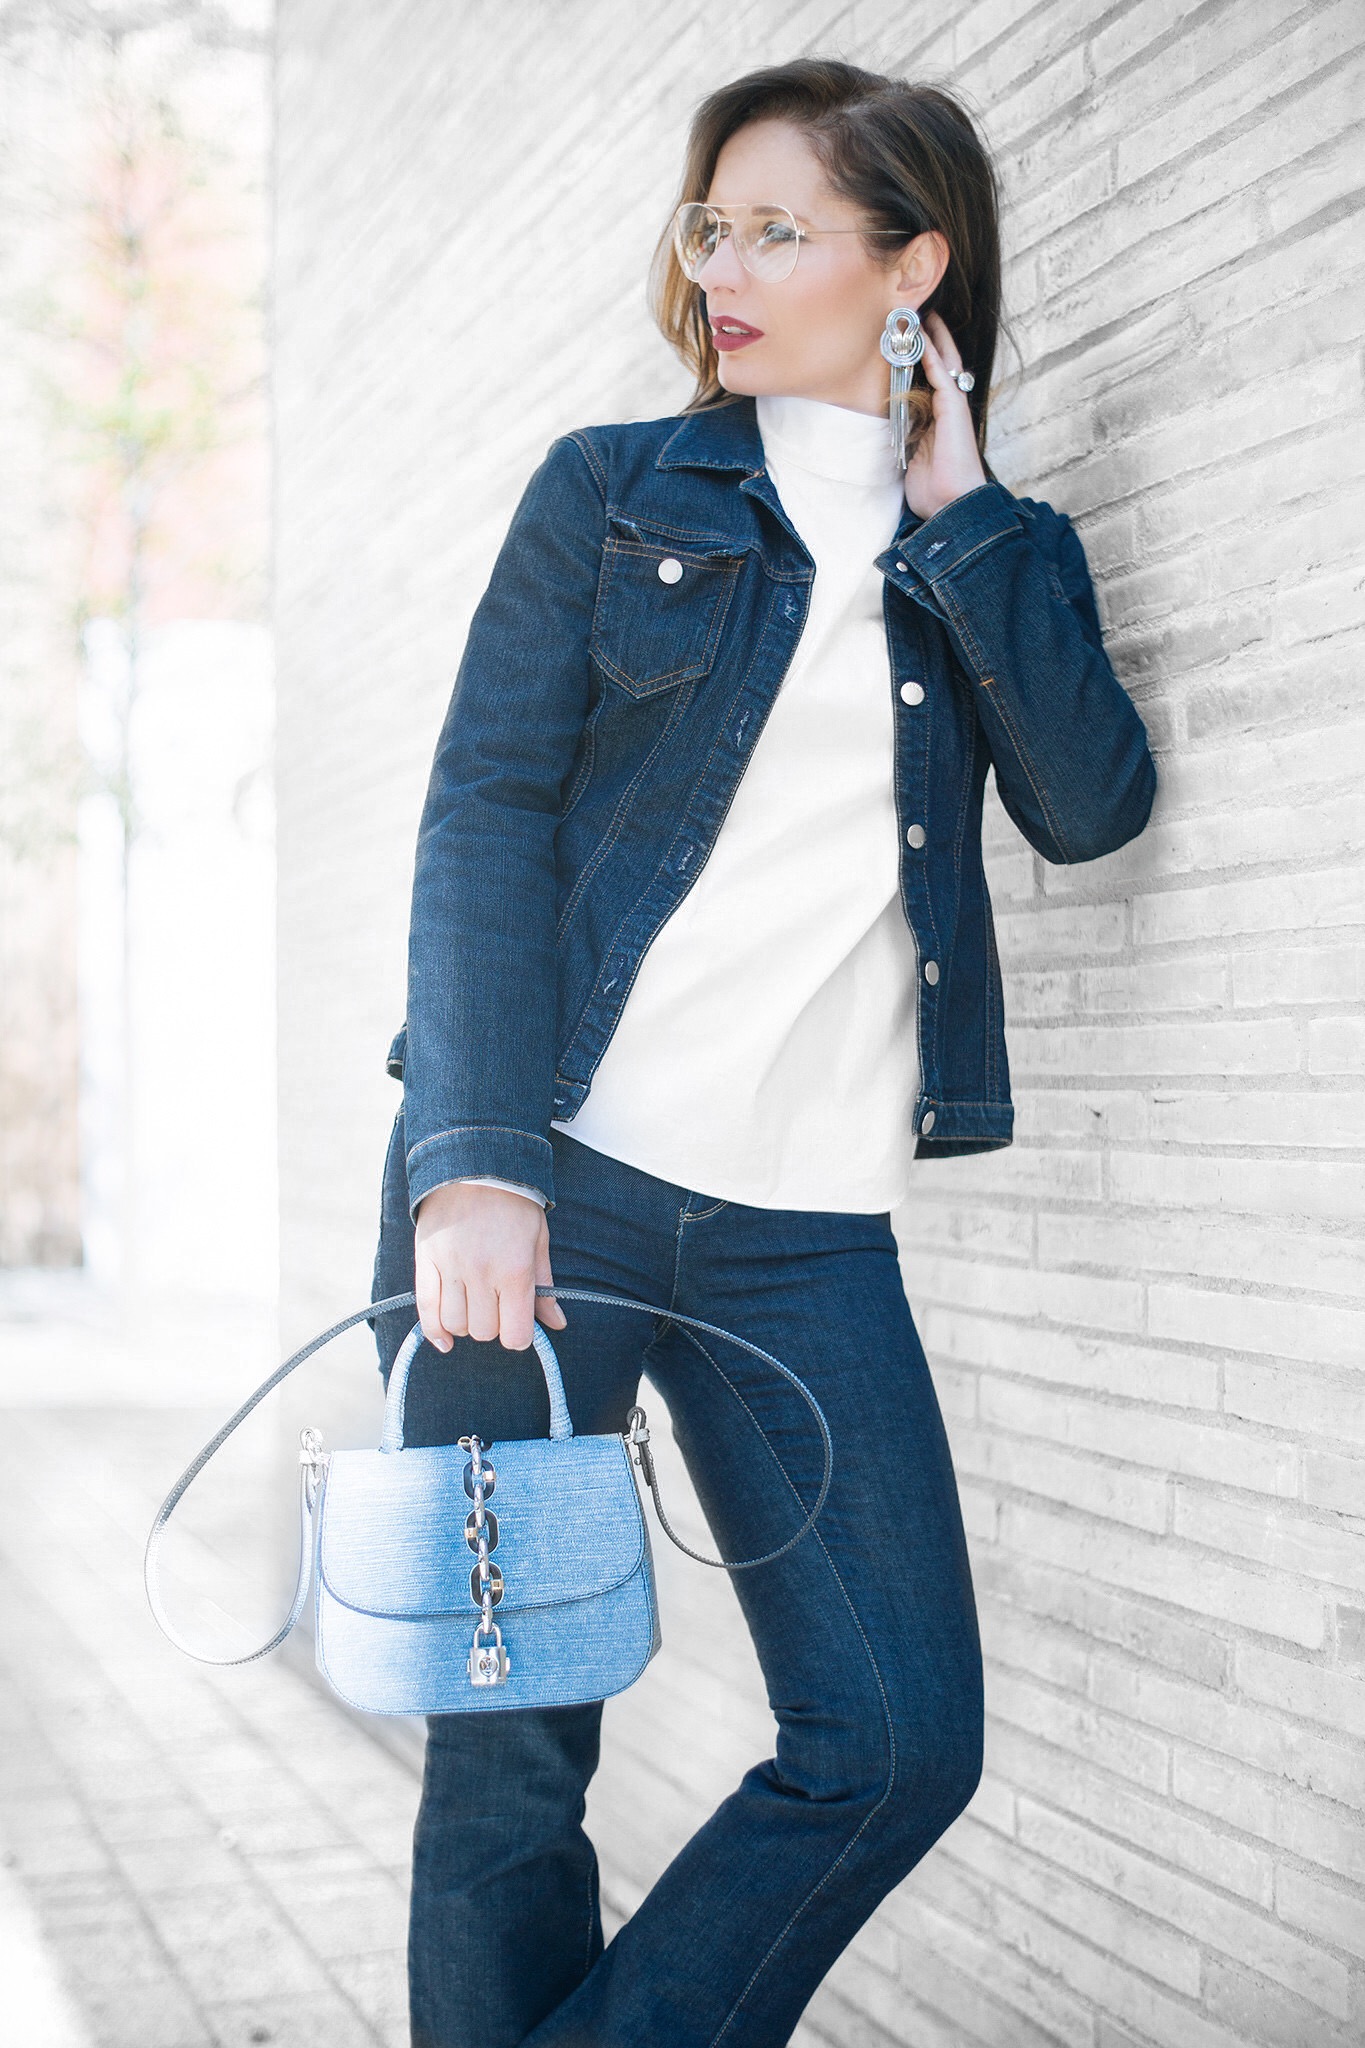 Wearing double denim is chic says Petra from Chic Journal blog